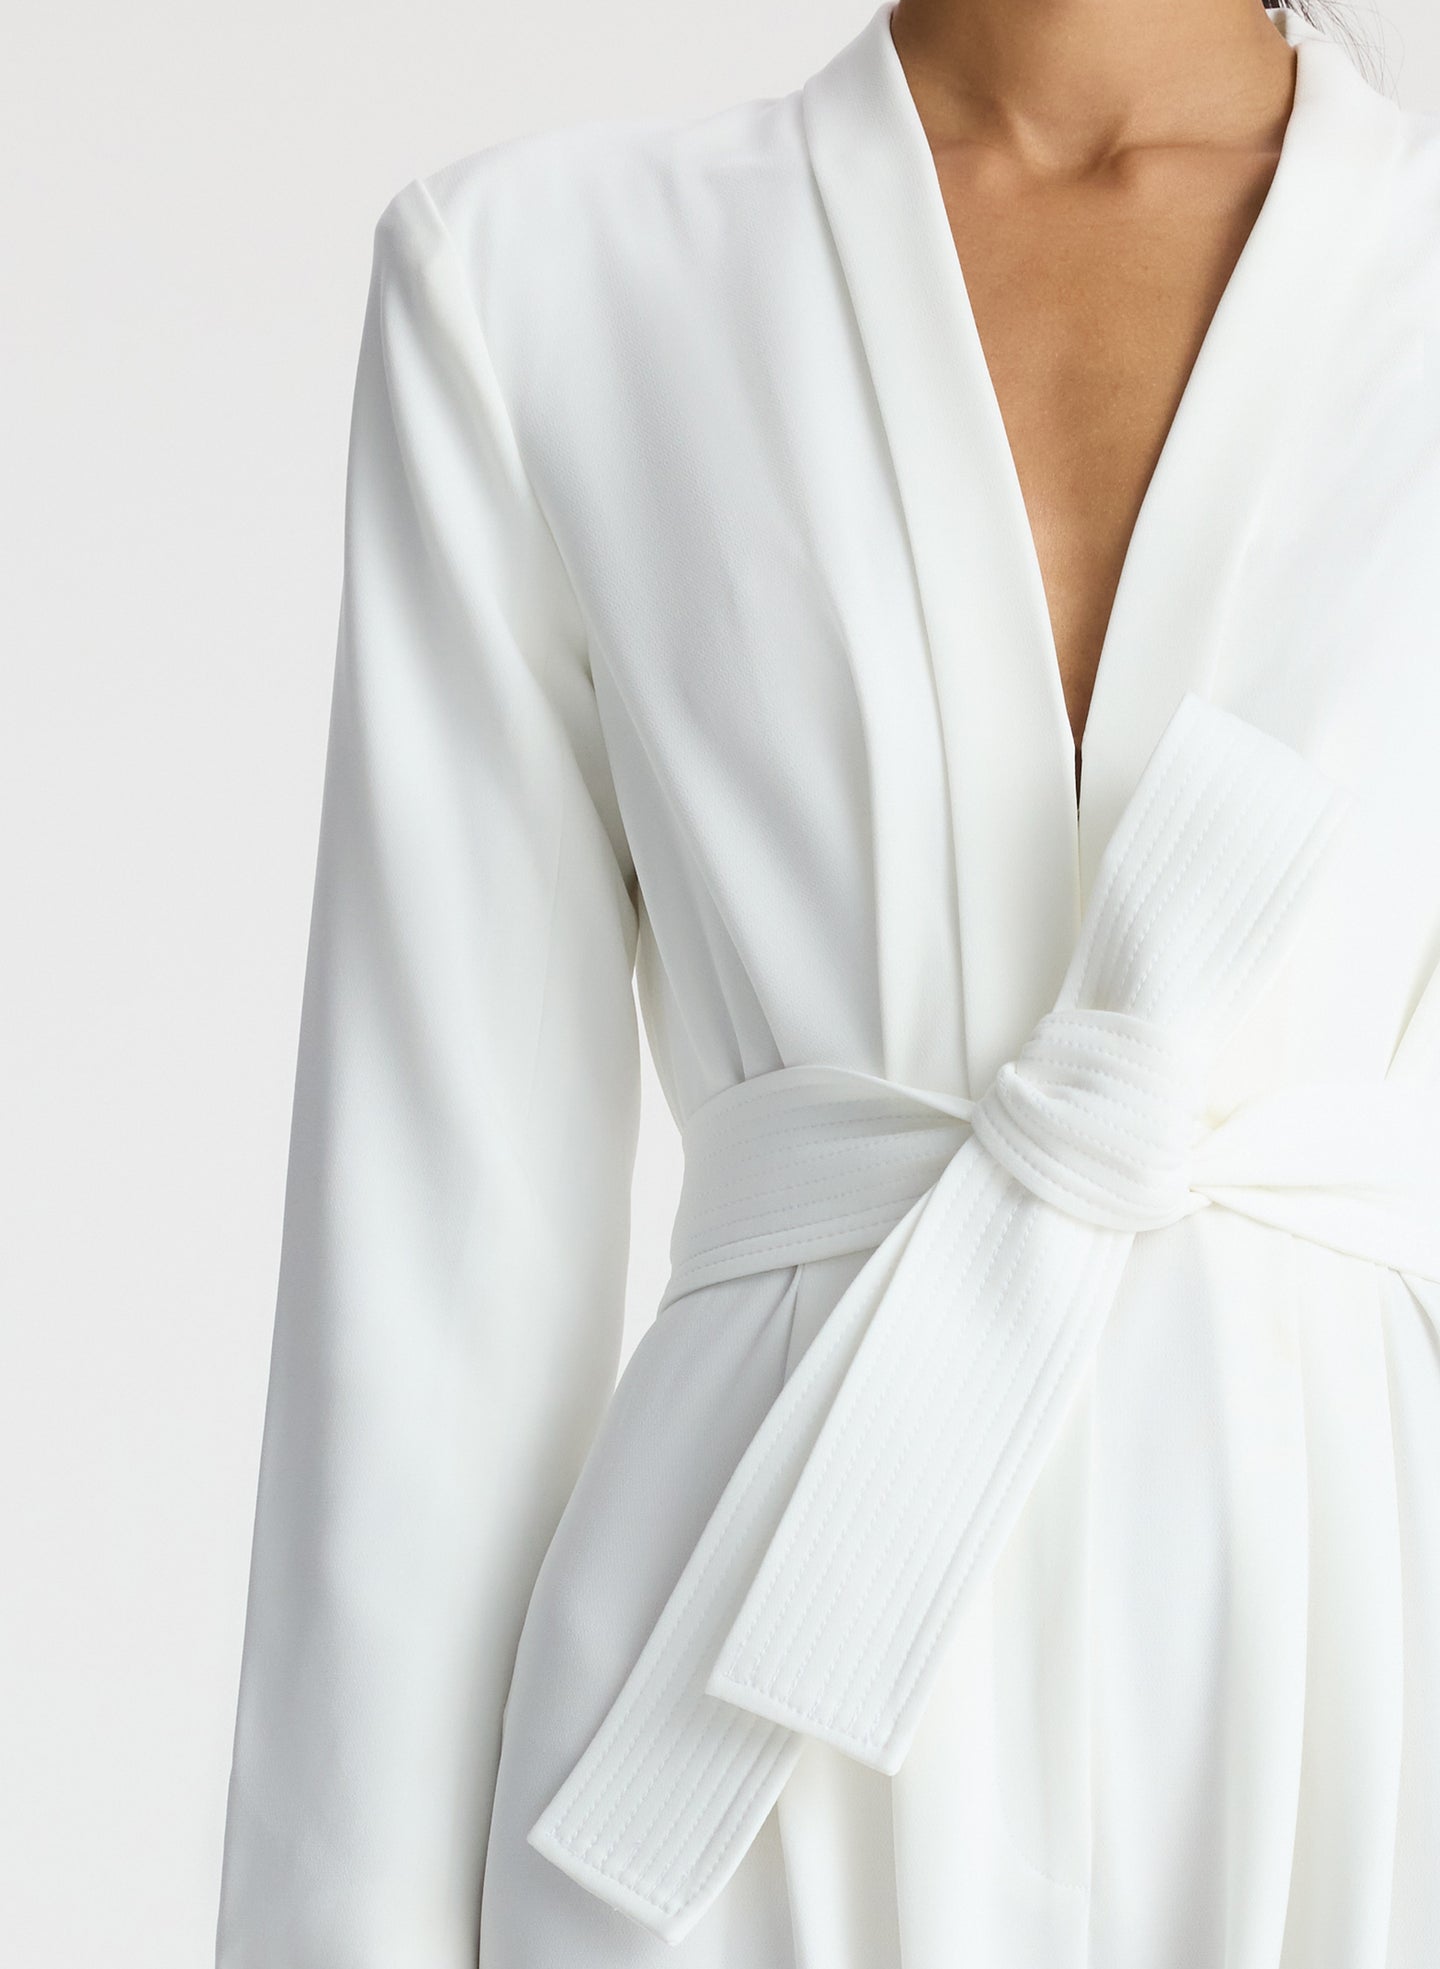 detail view of woman wearing white long sleeve jumpsuit